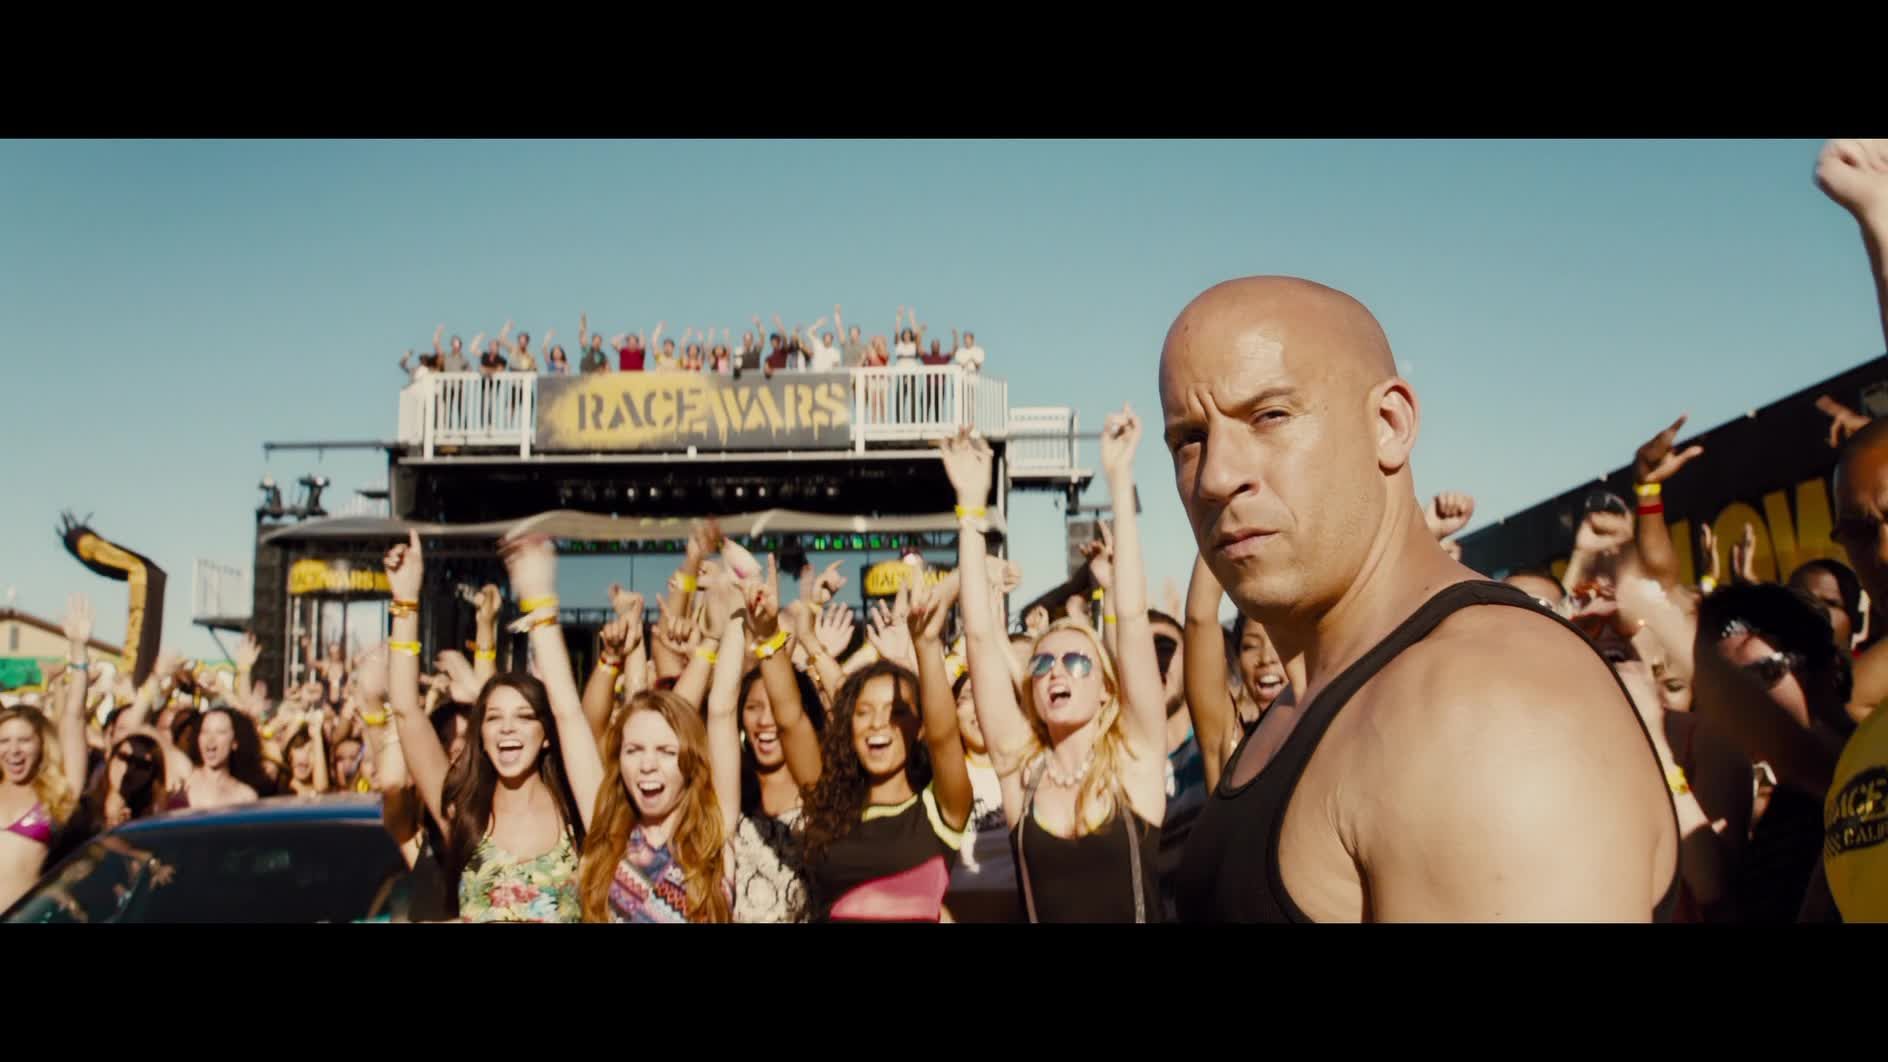 Every Vin Diesel Movie That Made Over $100 Million At The Box Office - News